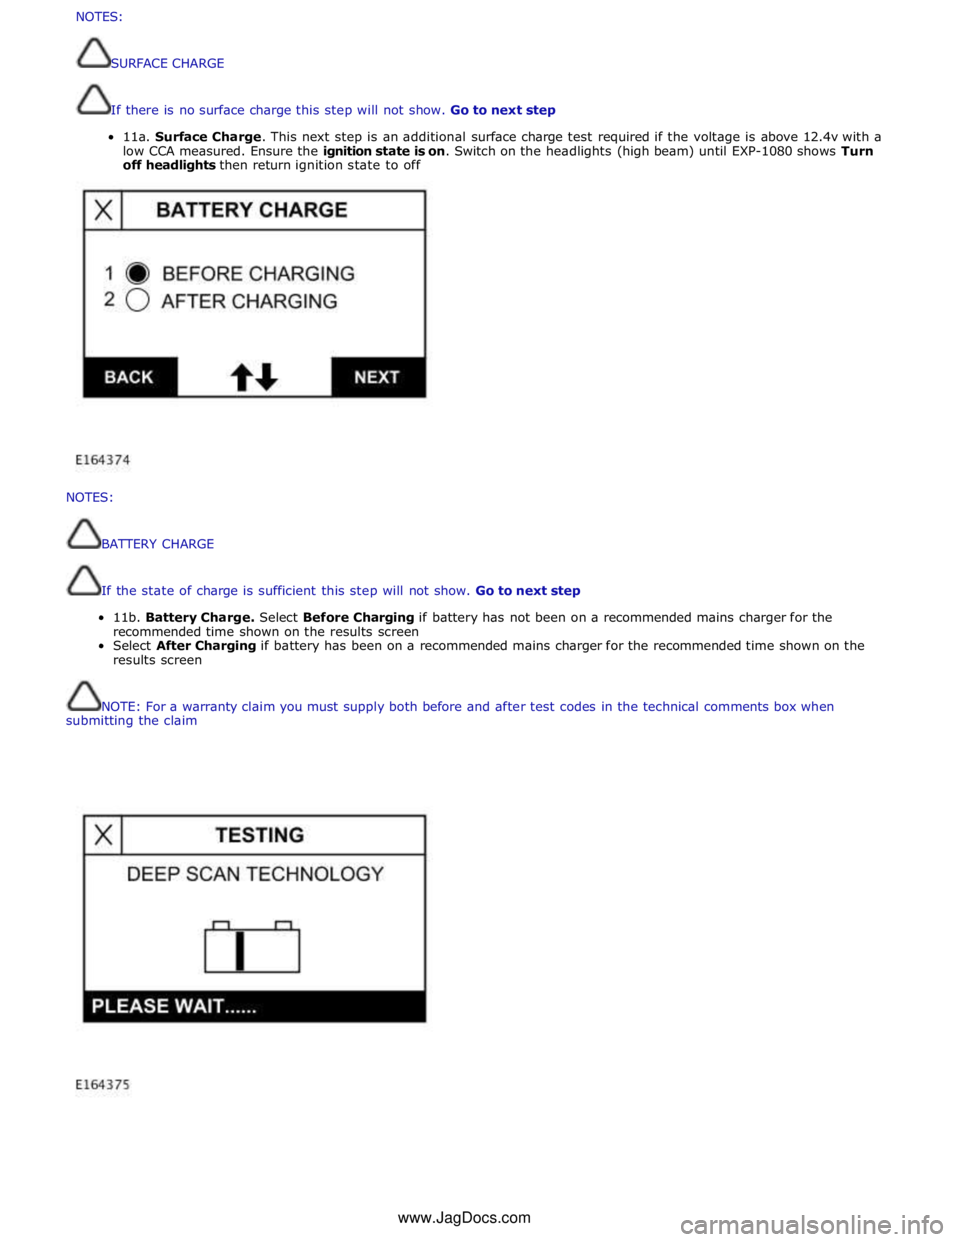 JAGUAR XFR 2010 1.G User Guide  
 
 
NOTES: 
 
 
BATTERY 
CHARGE 
 
 
If 
the 
state 
of 
charge 
is 
sufficient 
this 
step 
will 
not 
show. 
Go 
to 
next 
step 
 
11b. 
Battery 
Charge. 
Select 
Before 
Charging 
if 
battery 
ha